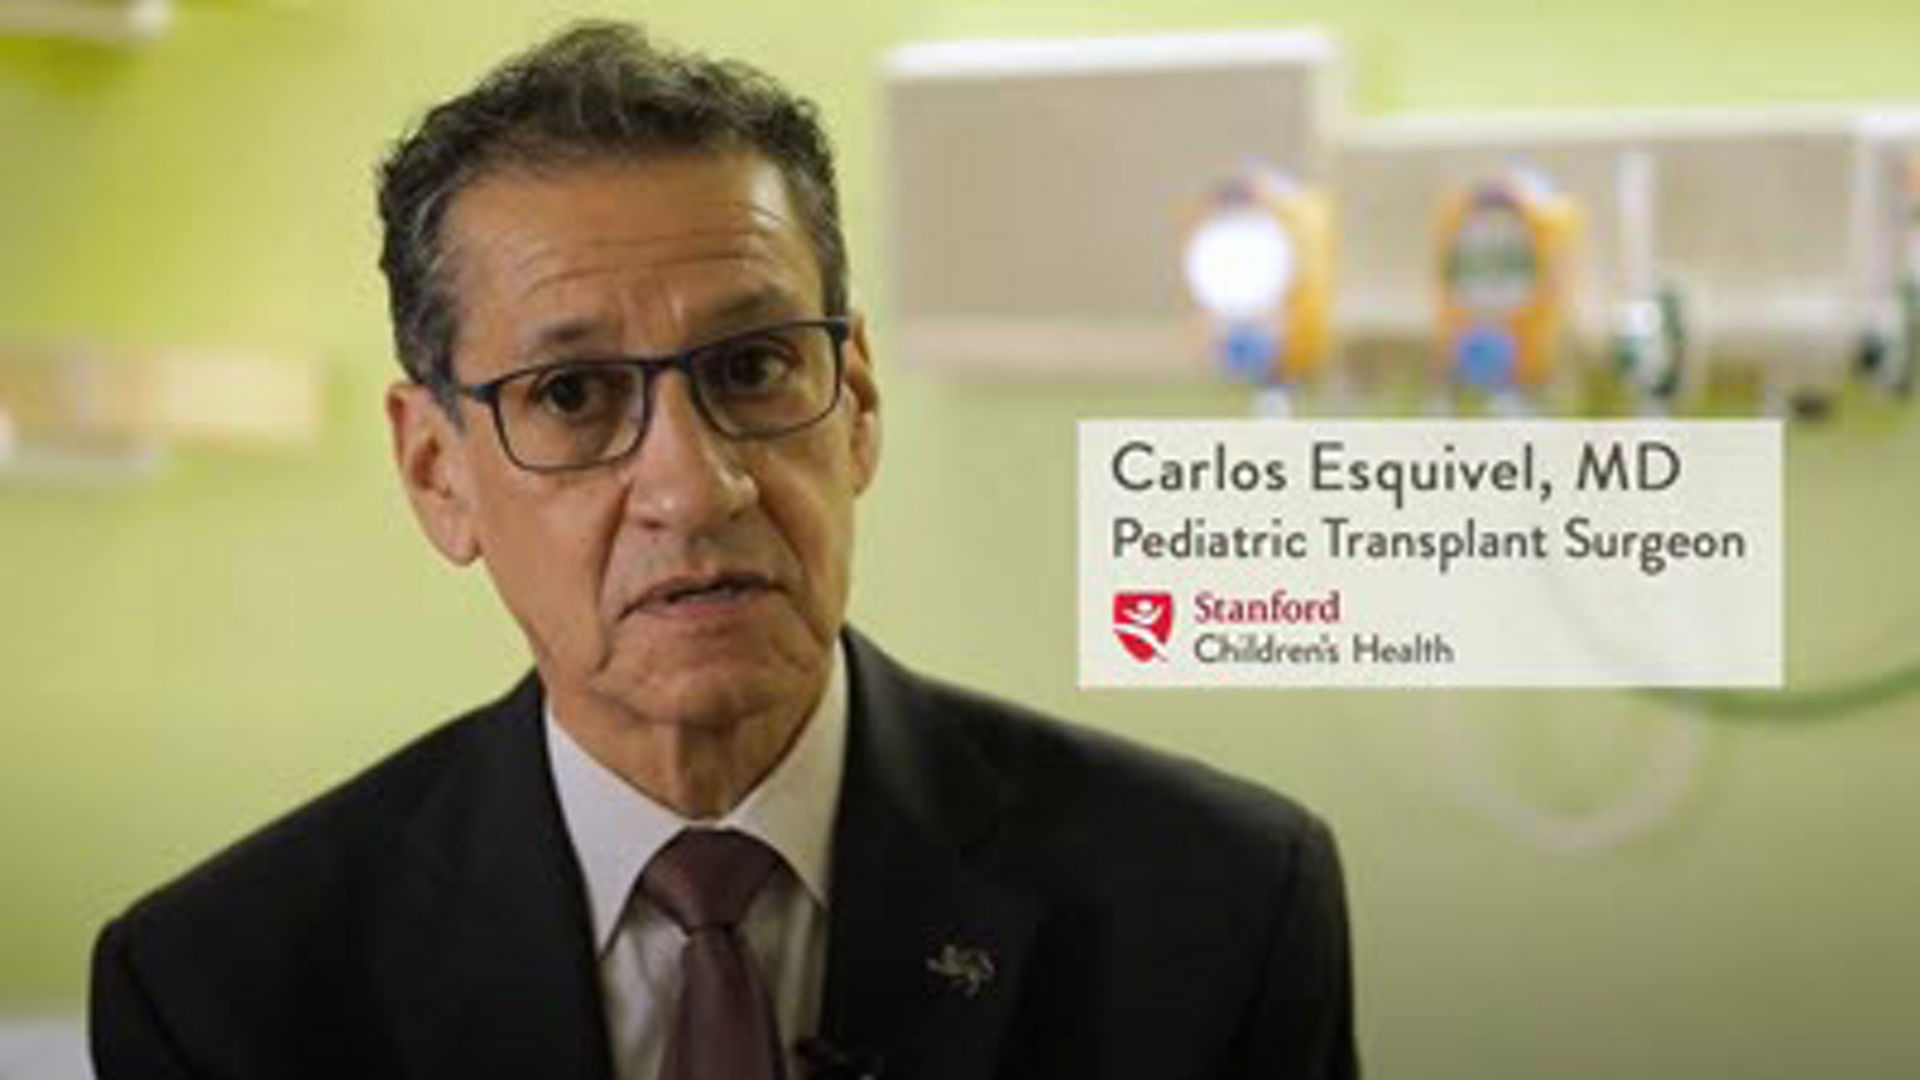 Why choose us? Pediatric Transplant Center at Lucile Packard Children's Hospital Stanford